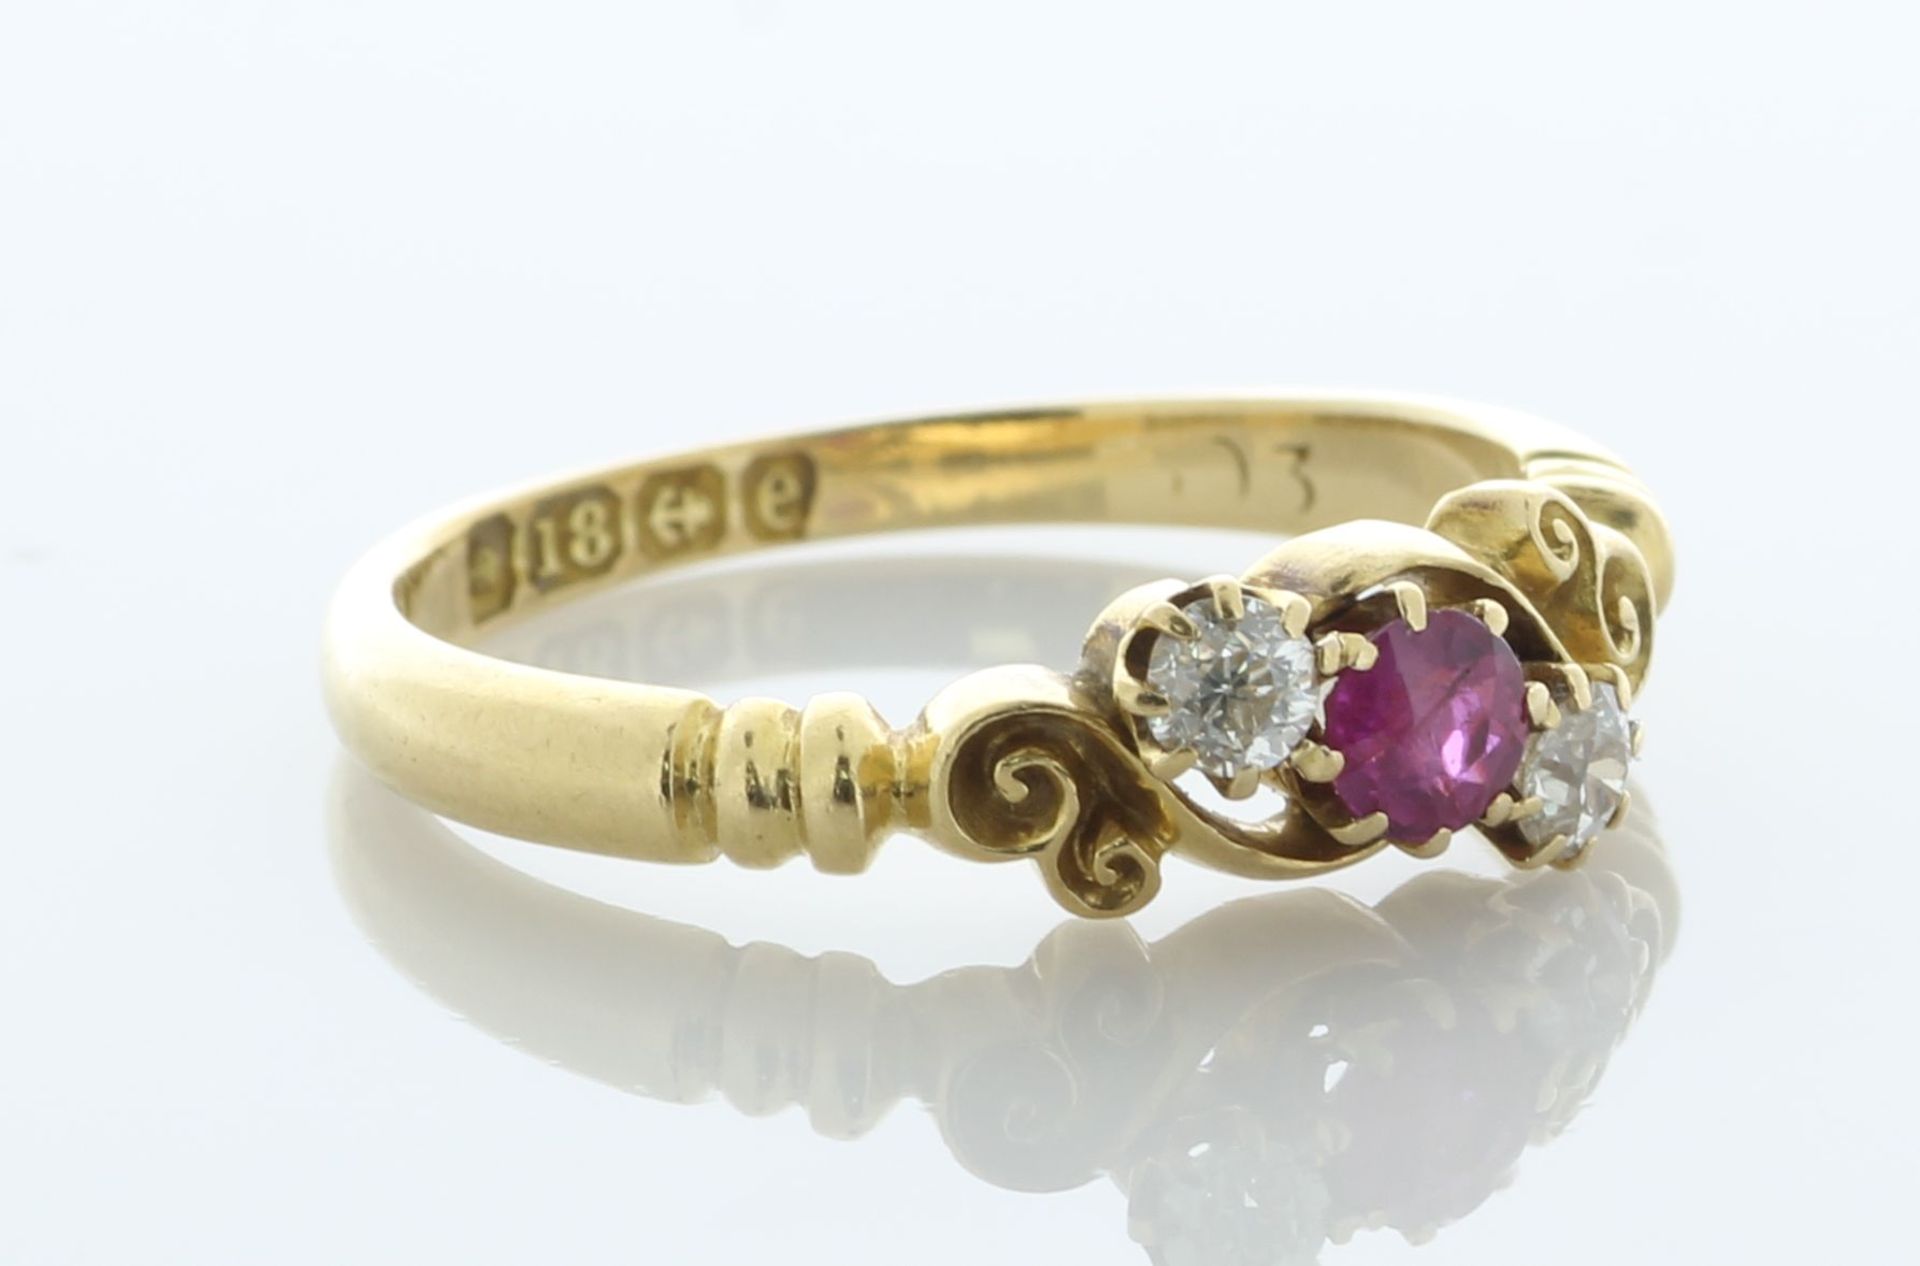 18ct Yellow Gold Diamond And Ruby Ring (R0.17) 0.16 Carats - Valued By AGI £3,250.00 - One round - Image 2 of 5